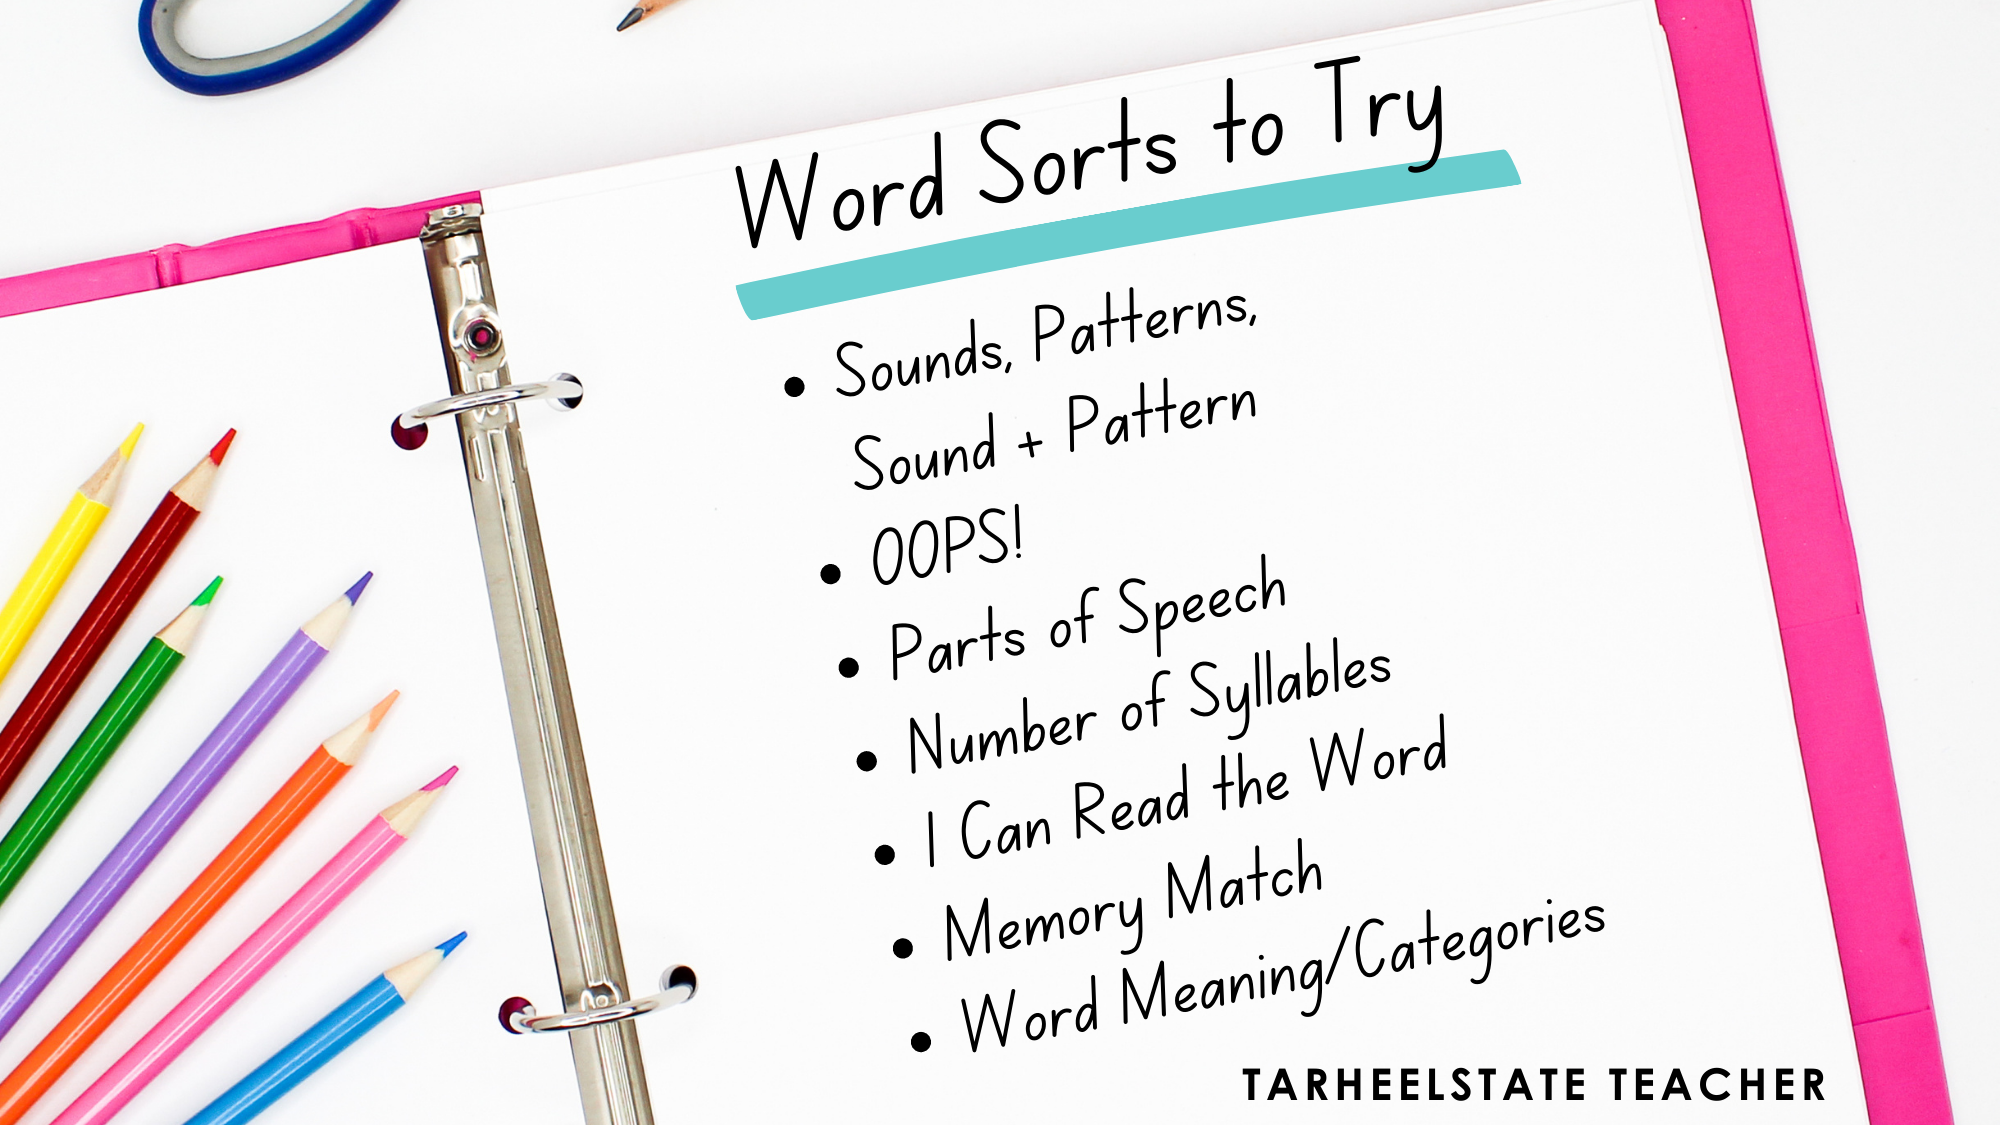 9-ideas-for-word-sorts-free-how-to-sort-posters-tarheelstate-teacher